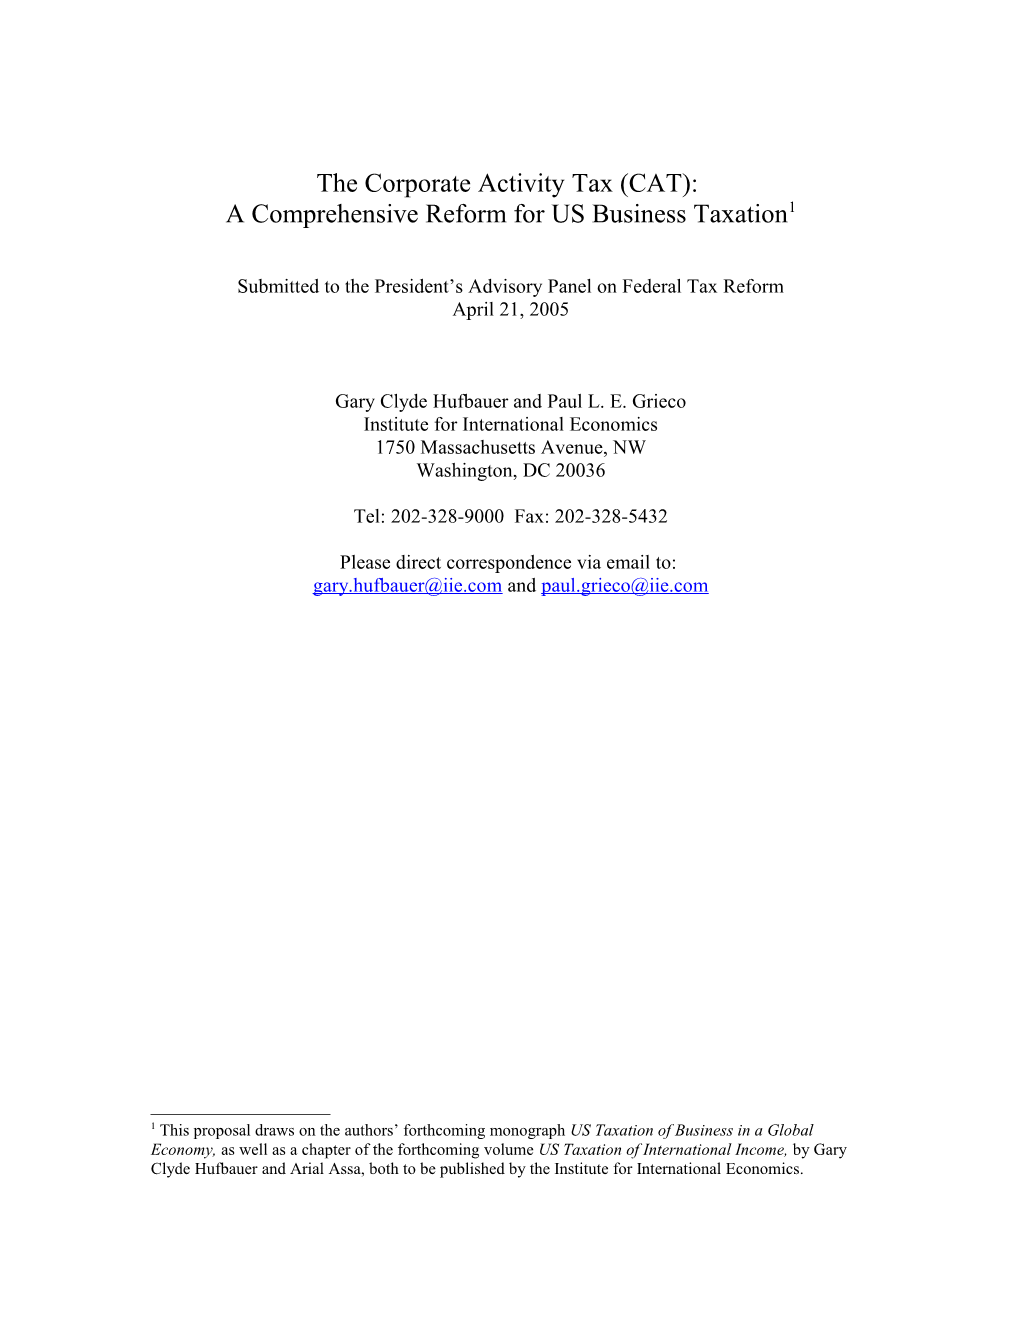 The Corporate Activity Tax (CAT): a Comprehensive Reform for US Business Taxation